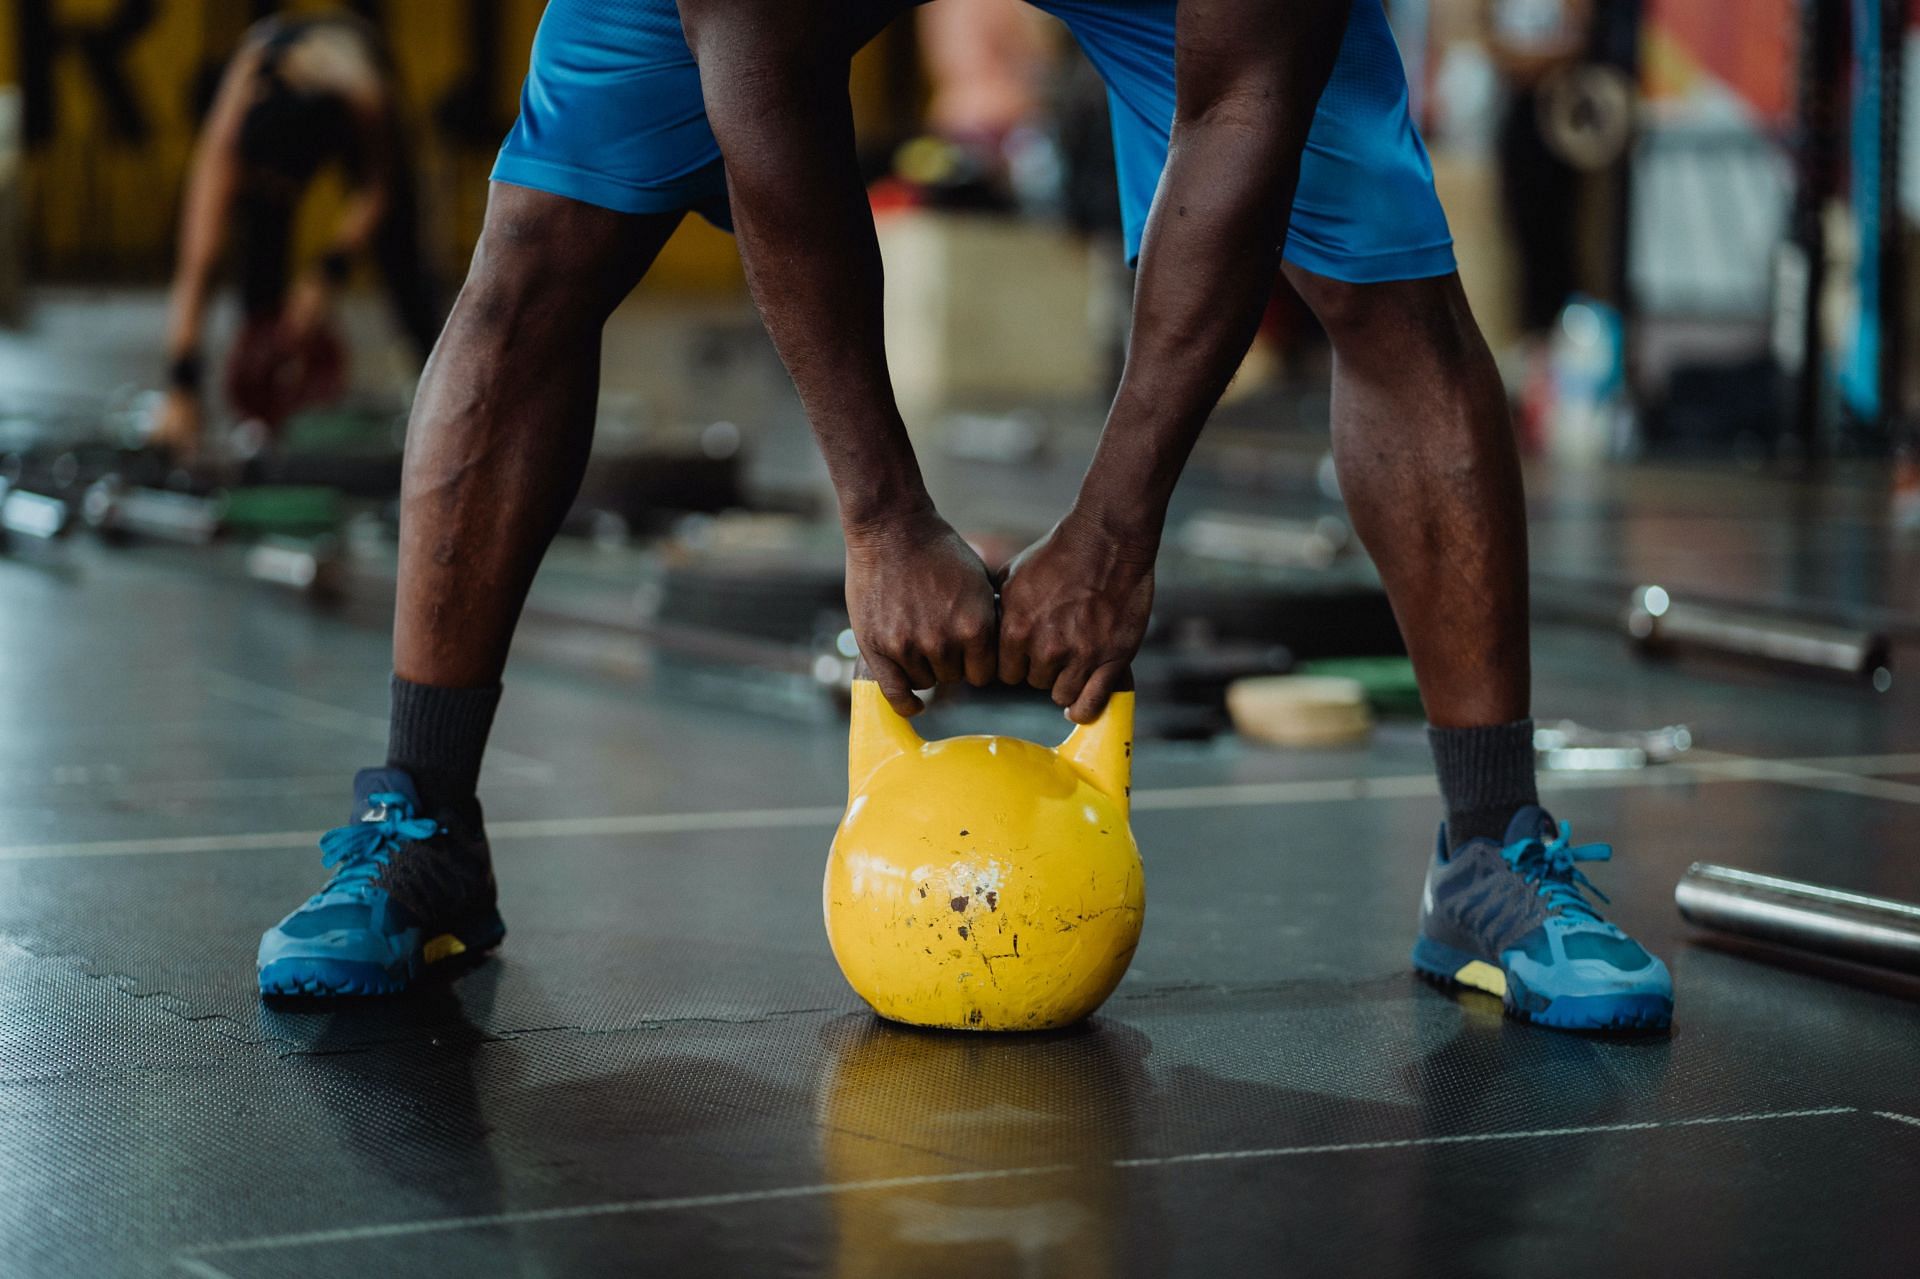 Kettlebell exercises are great for toning your upper back. (Photo by Ketut Subiyanto via pexels)